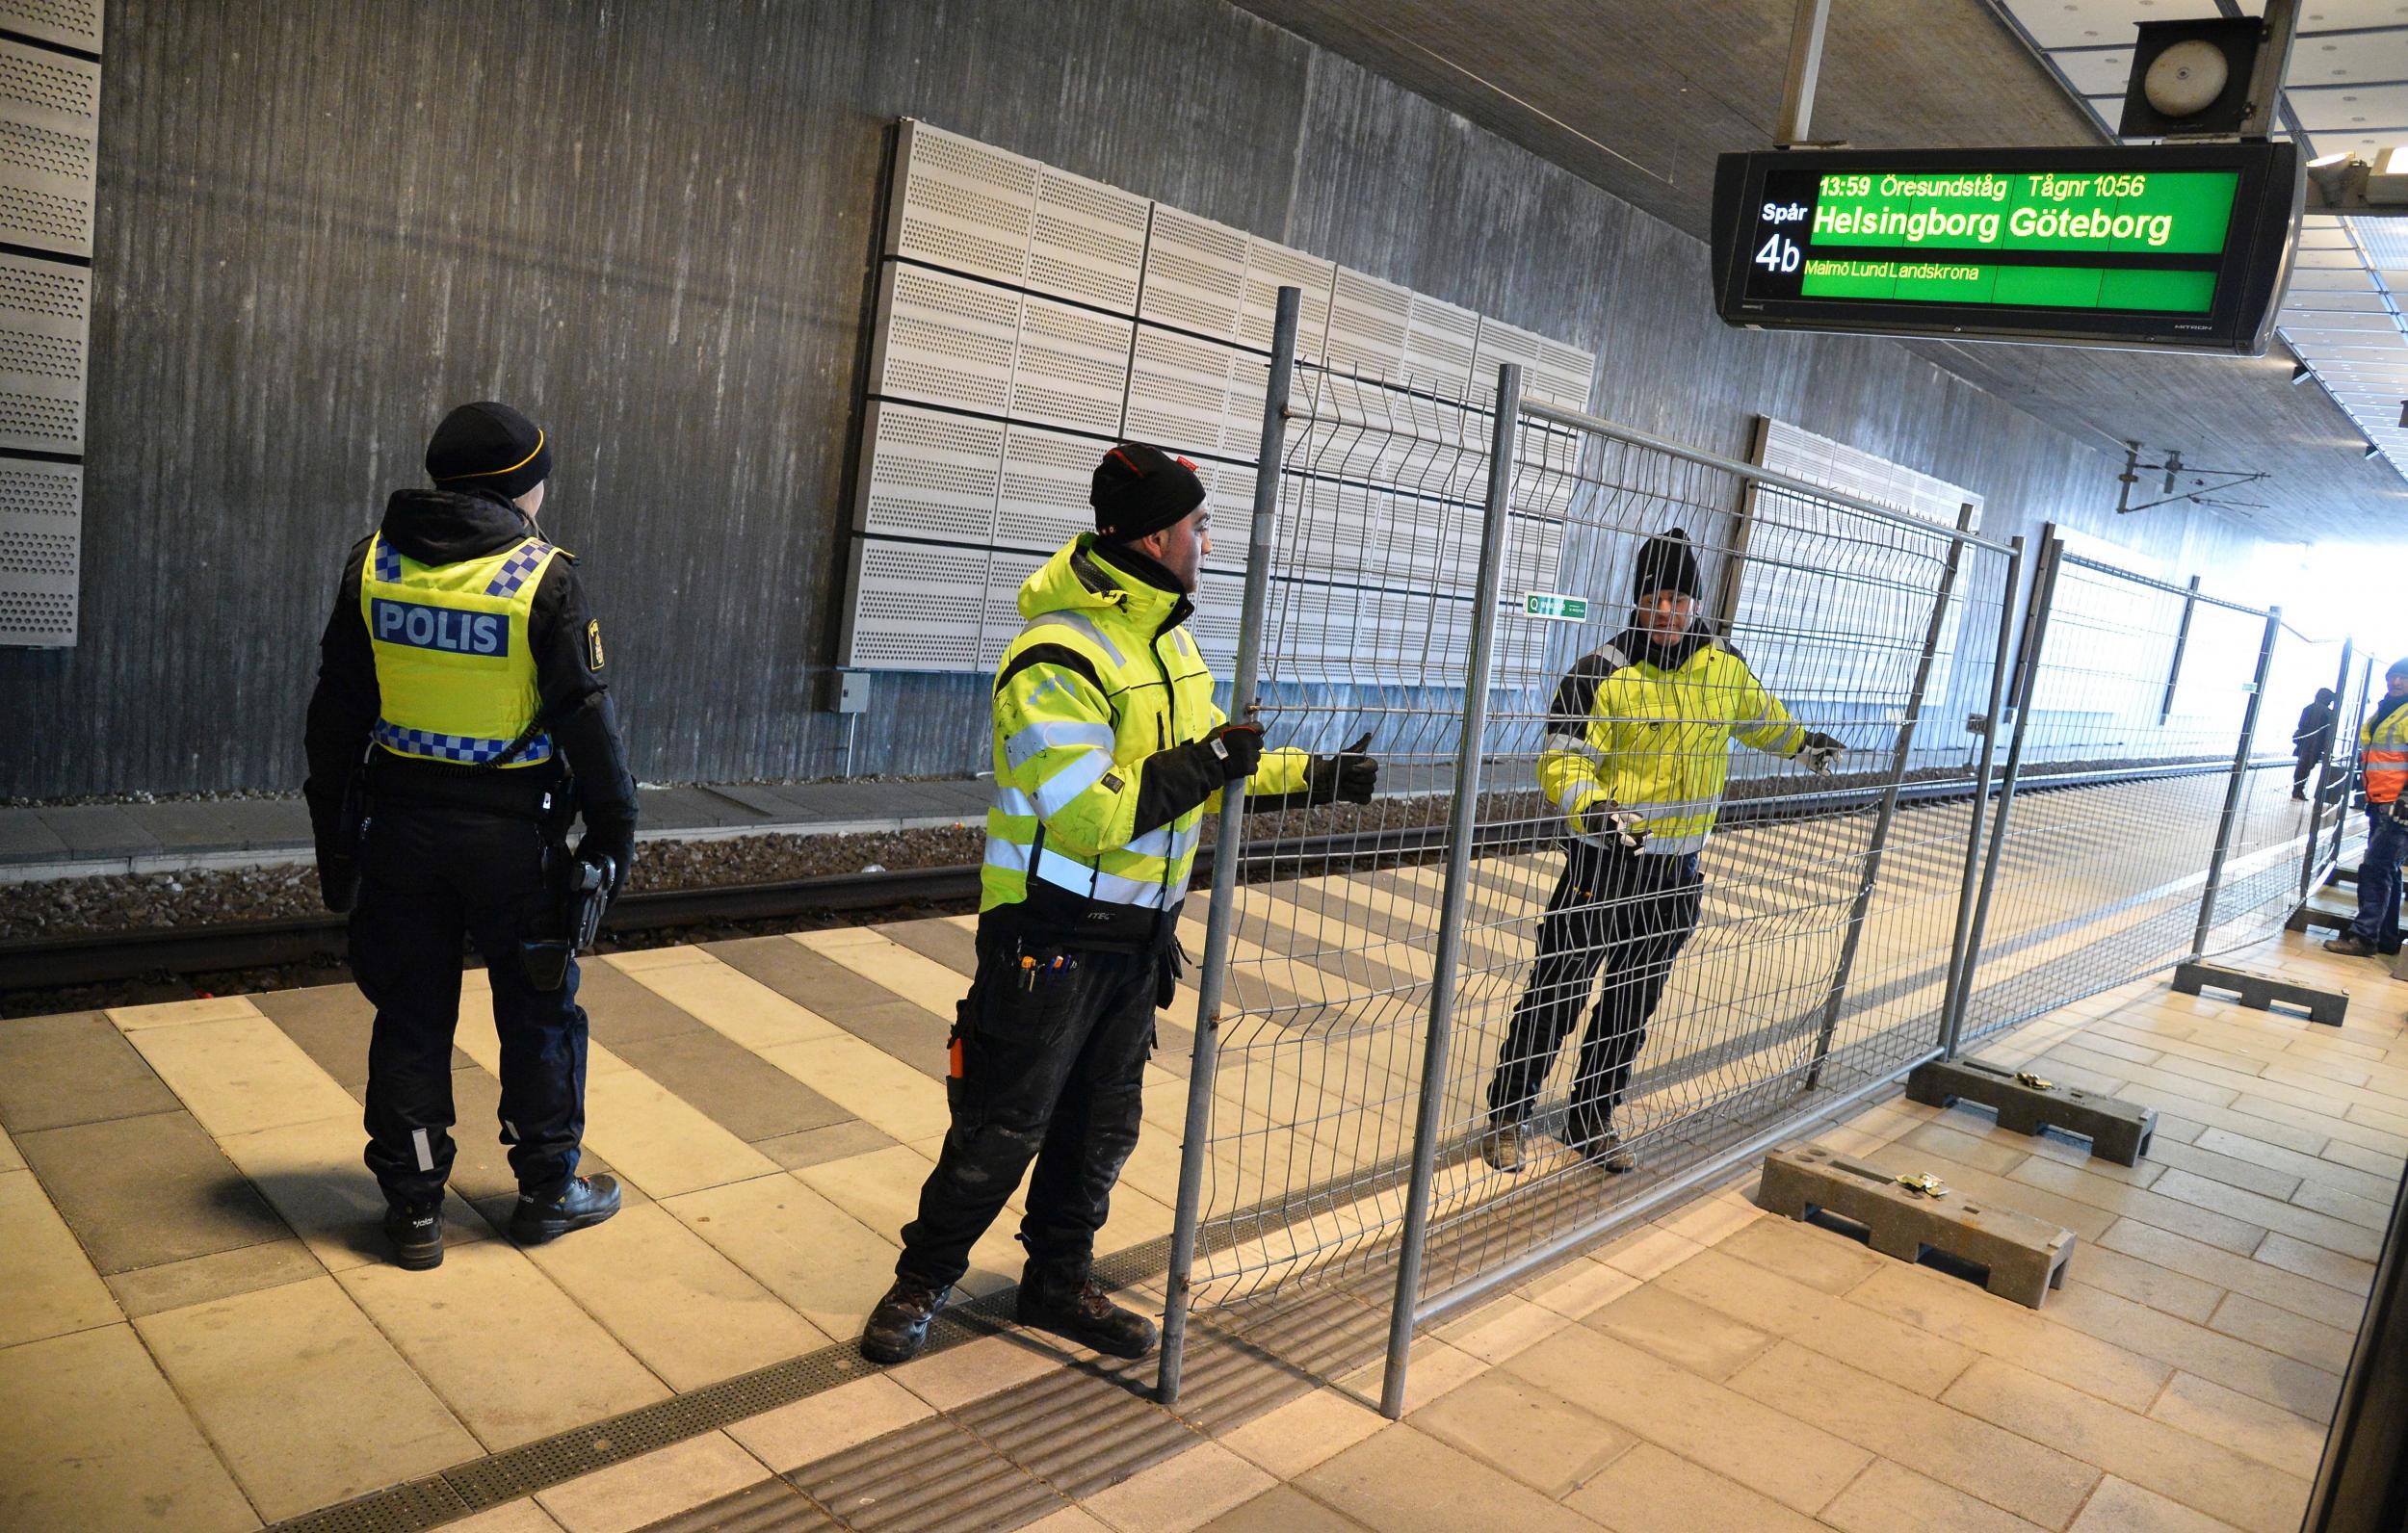 A temporary fence is erected between domestic and international tracks at a train station in Sweden